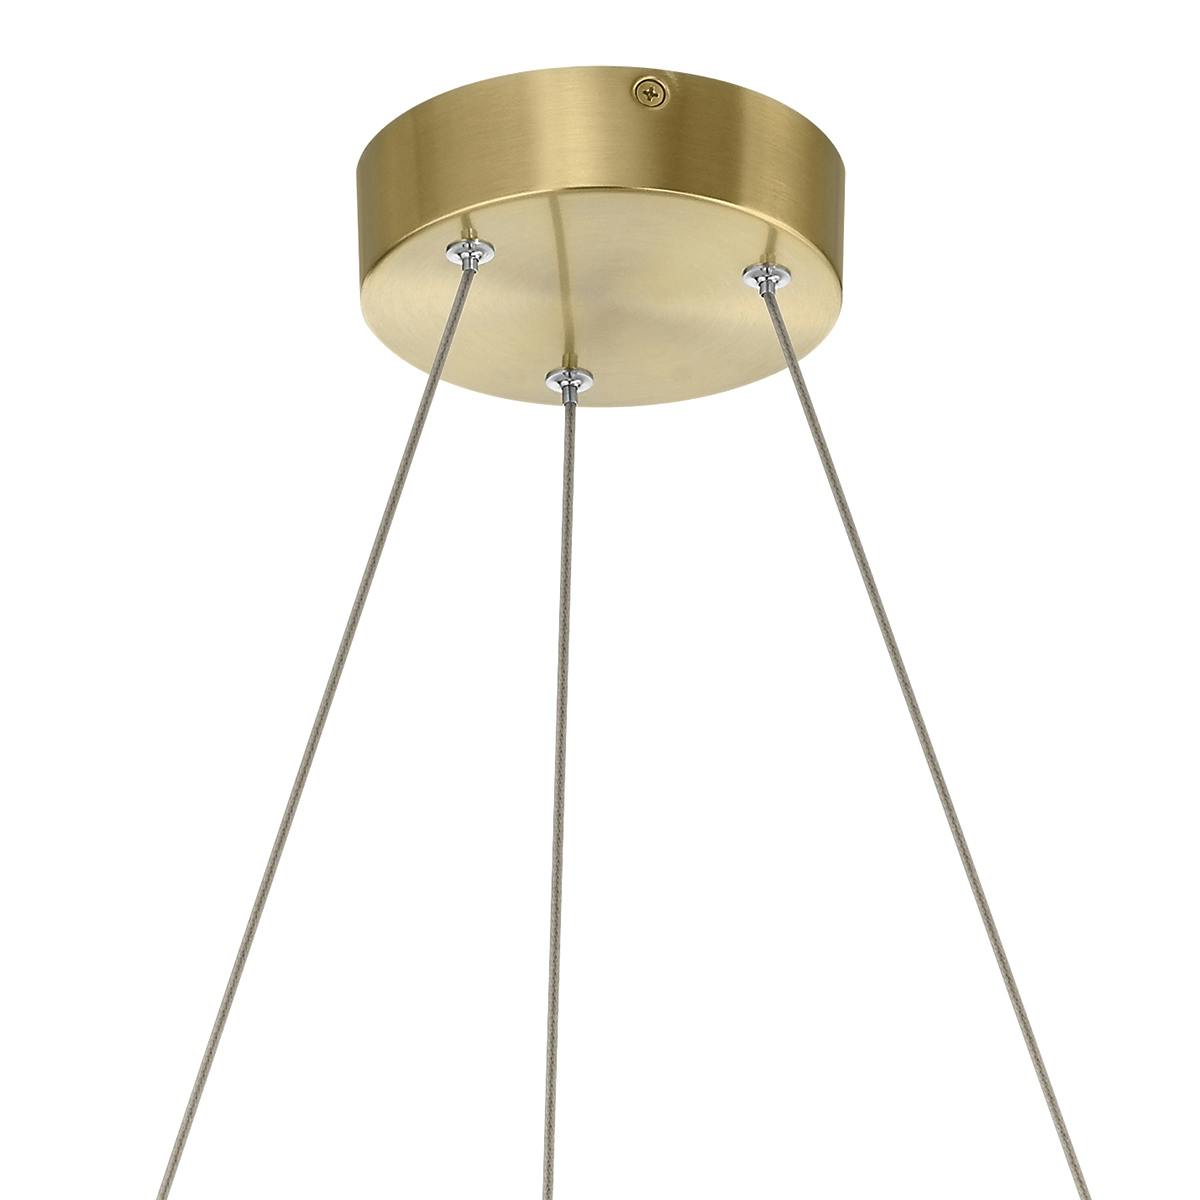 Canopy for the Arabella LED 6 Light Chandelier Gold on a white background